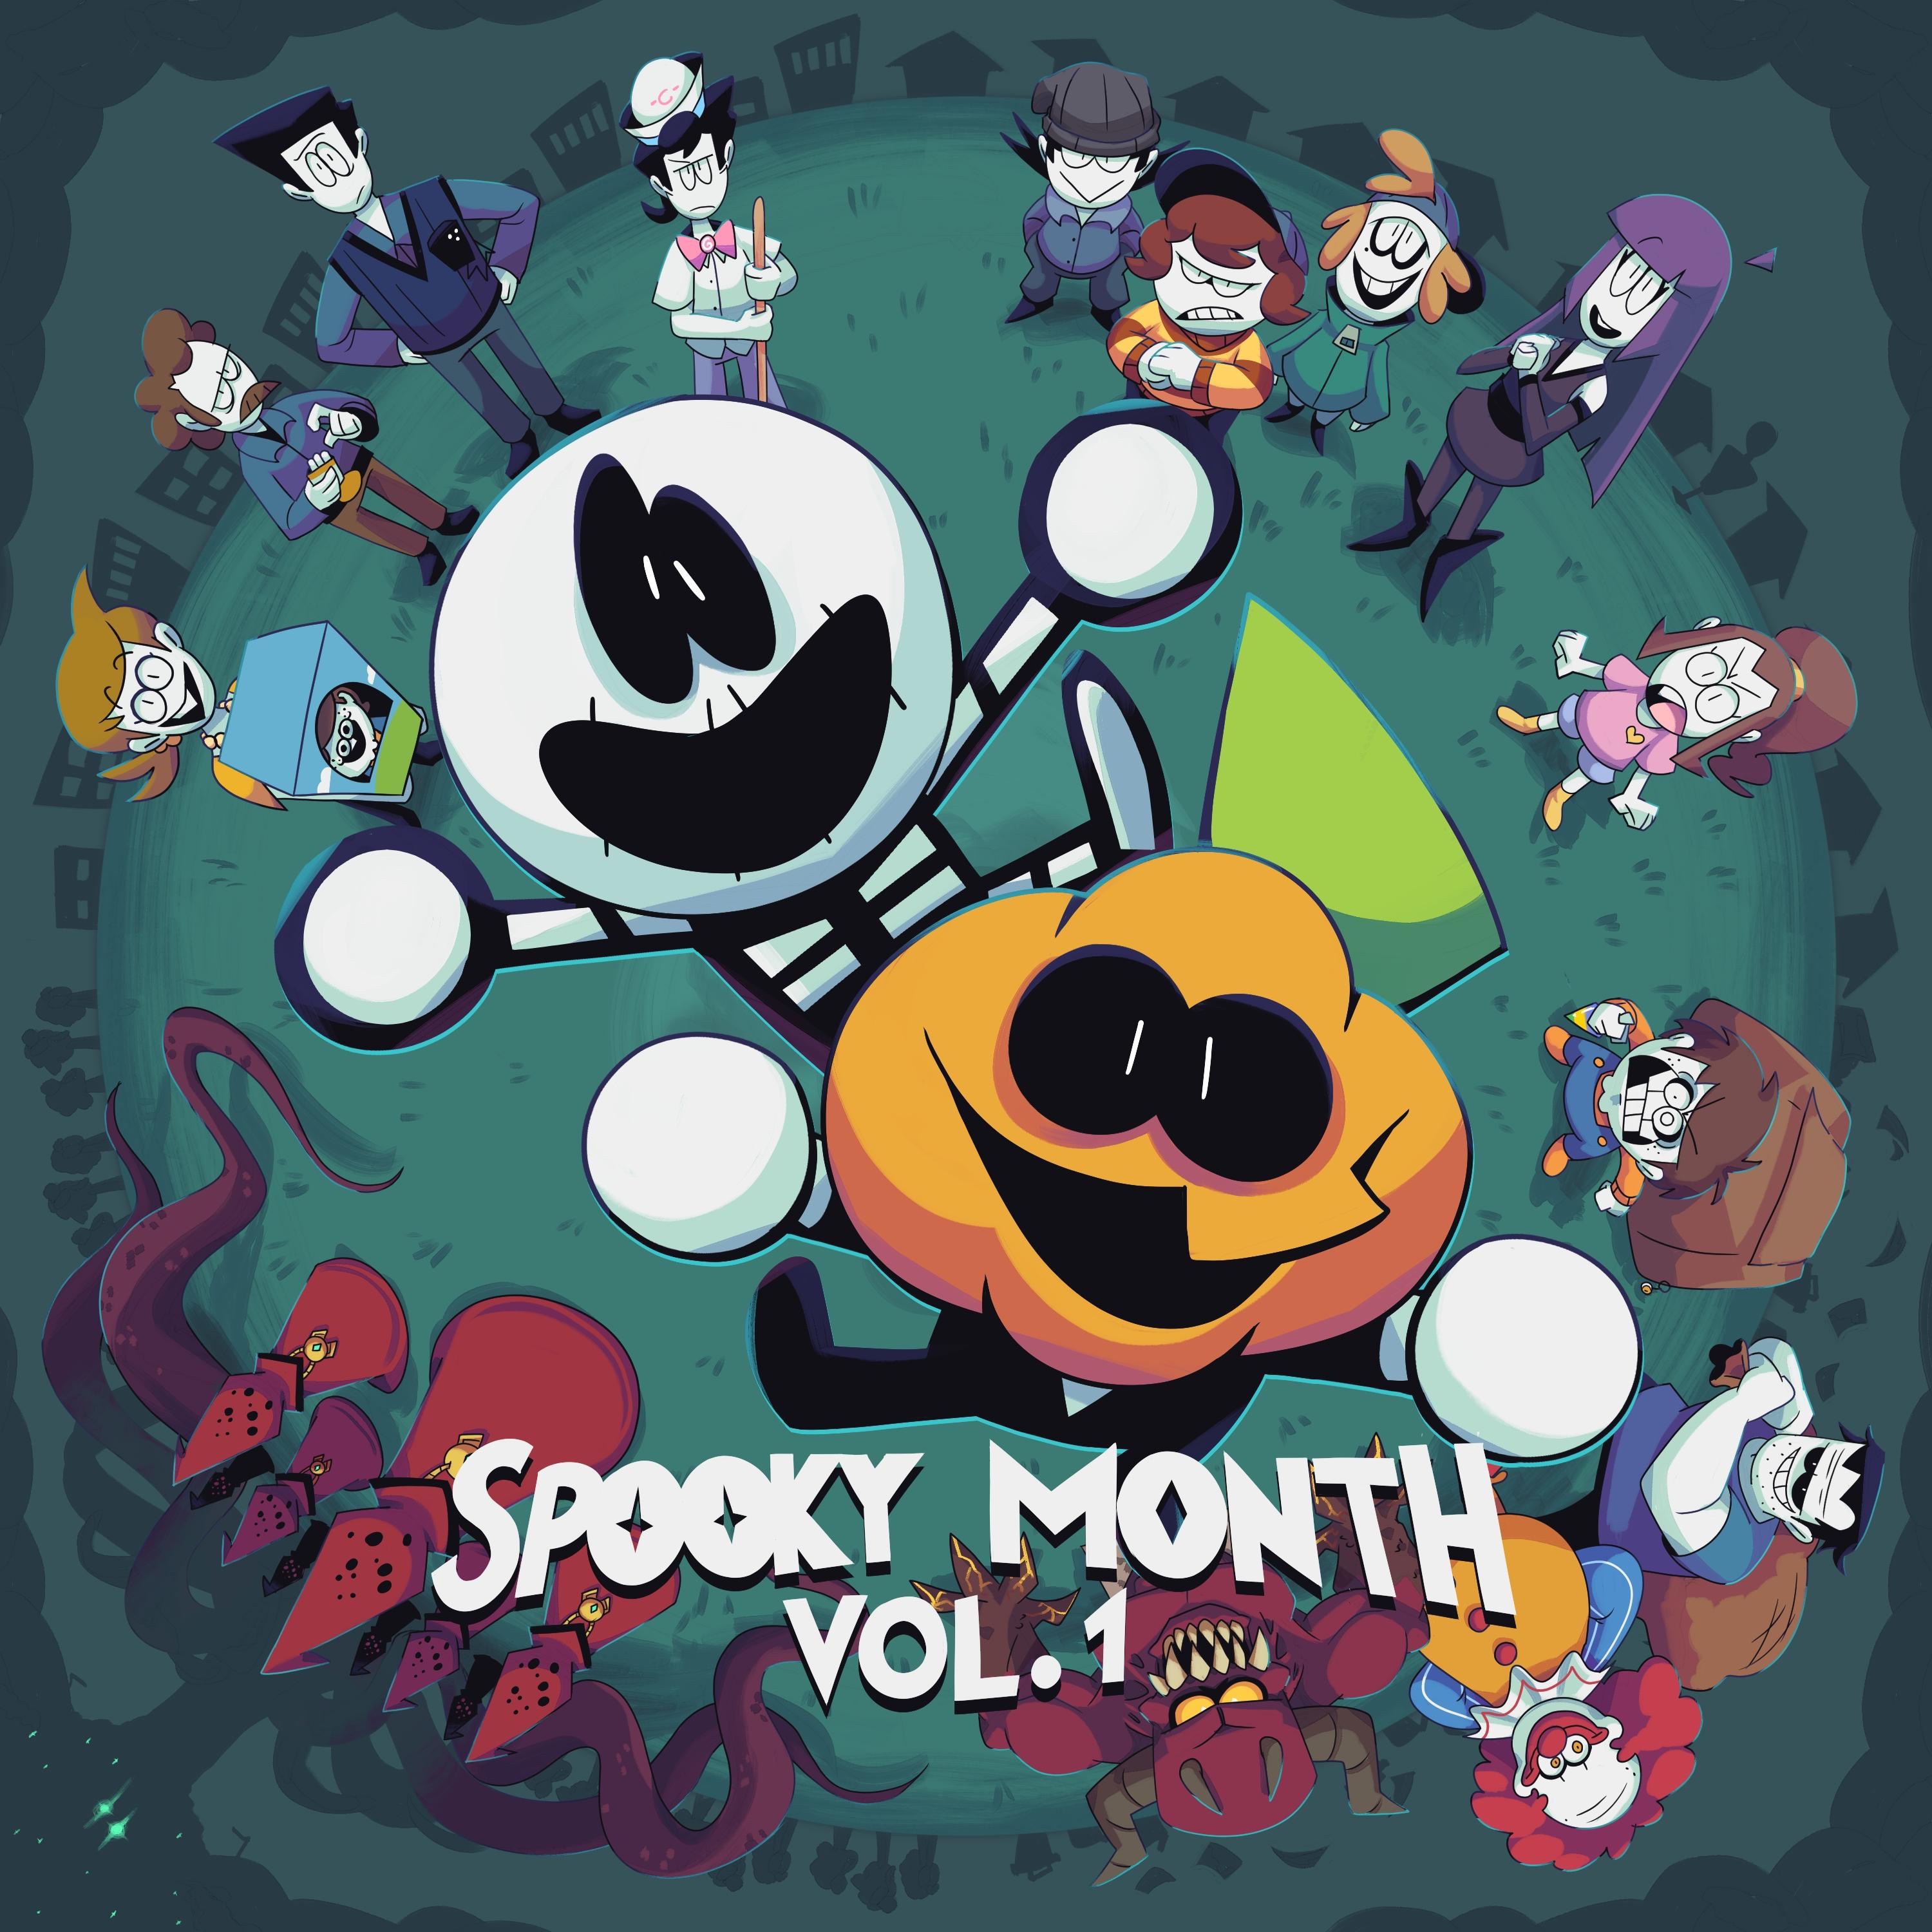 Spooky month scenes